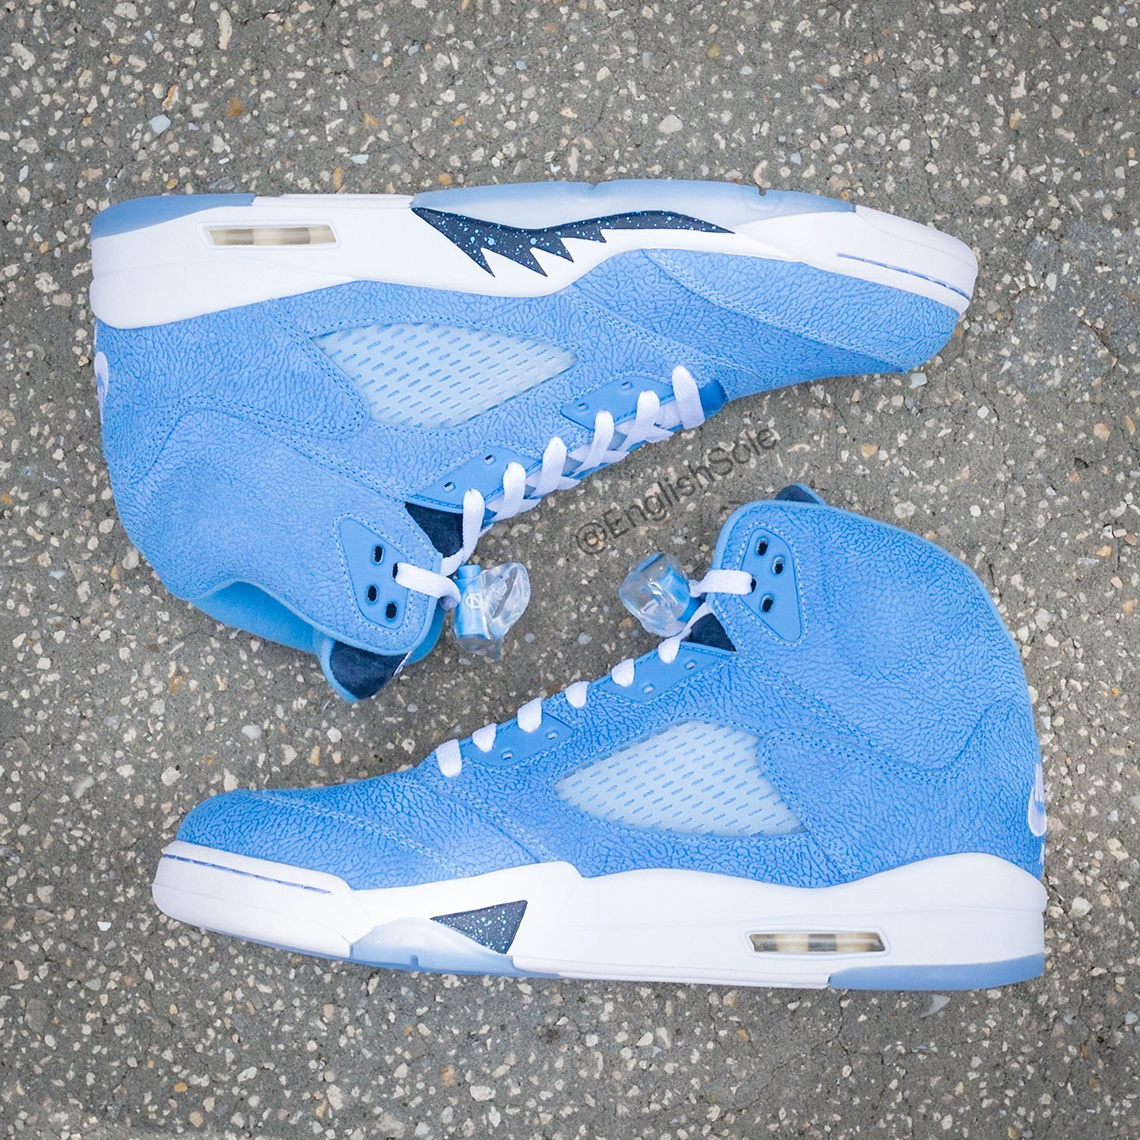 Thankfully They Added This! Jordan 5 UNC Review & On Foot 